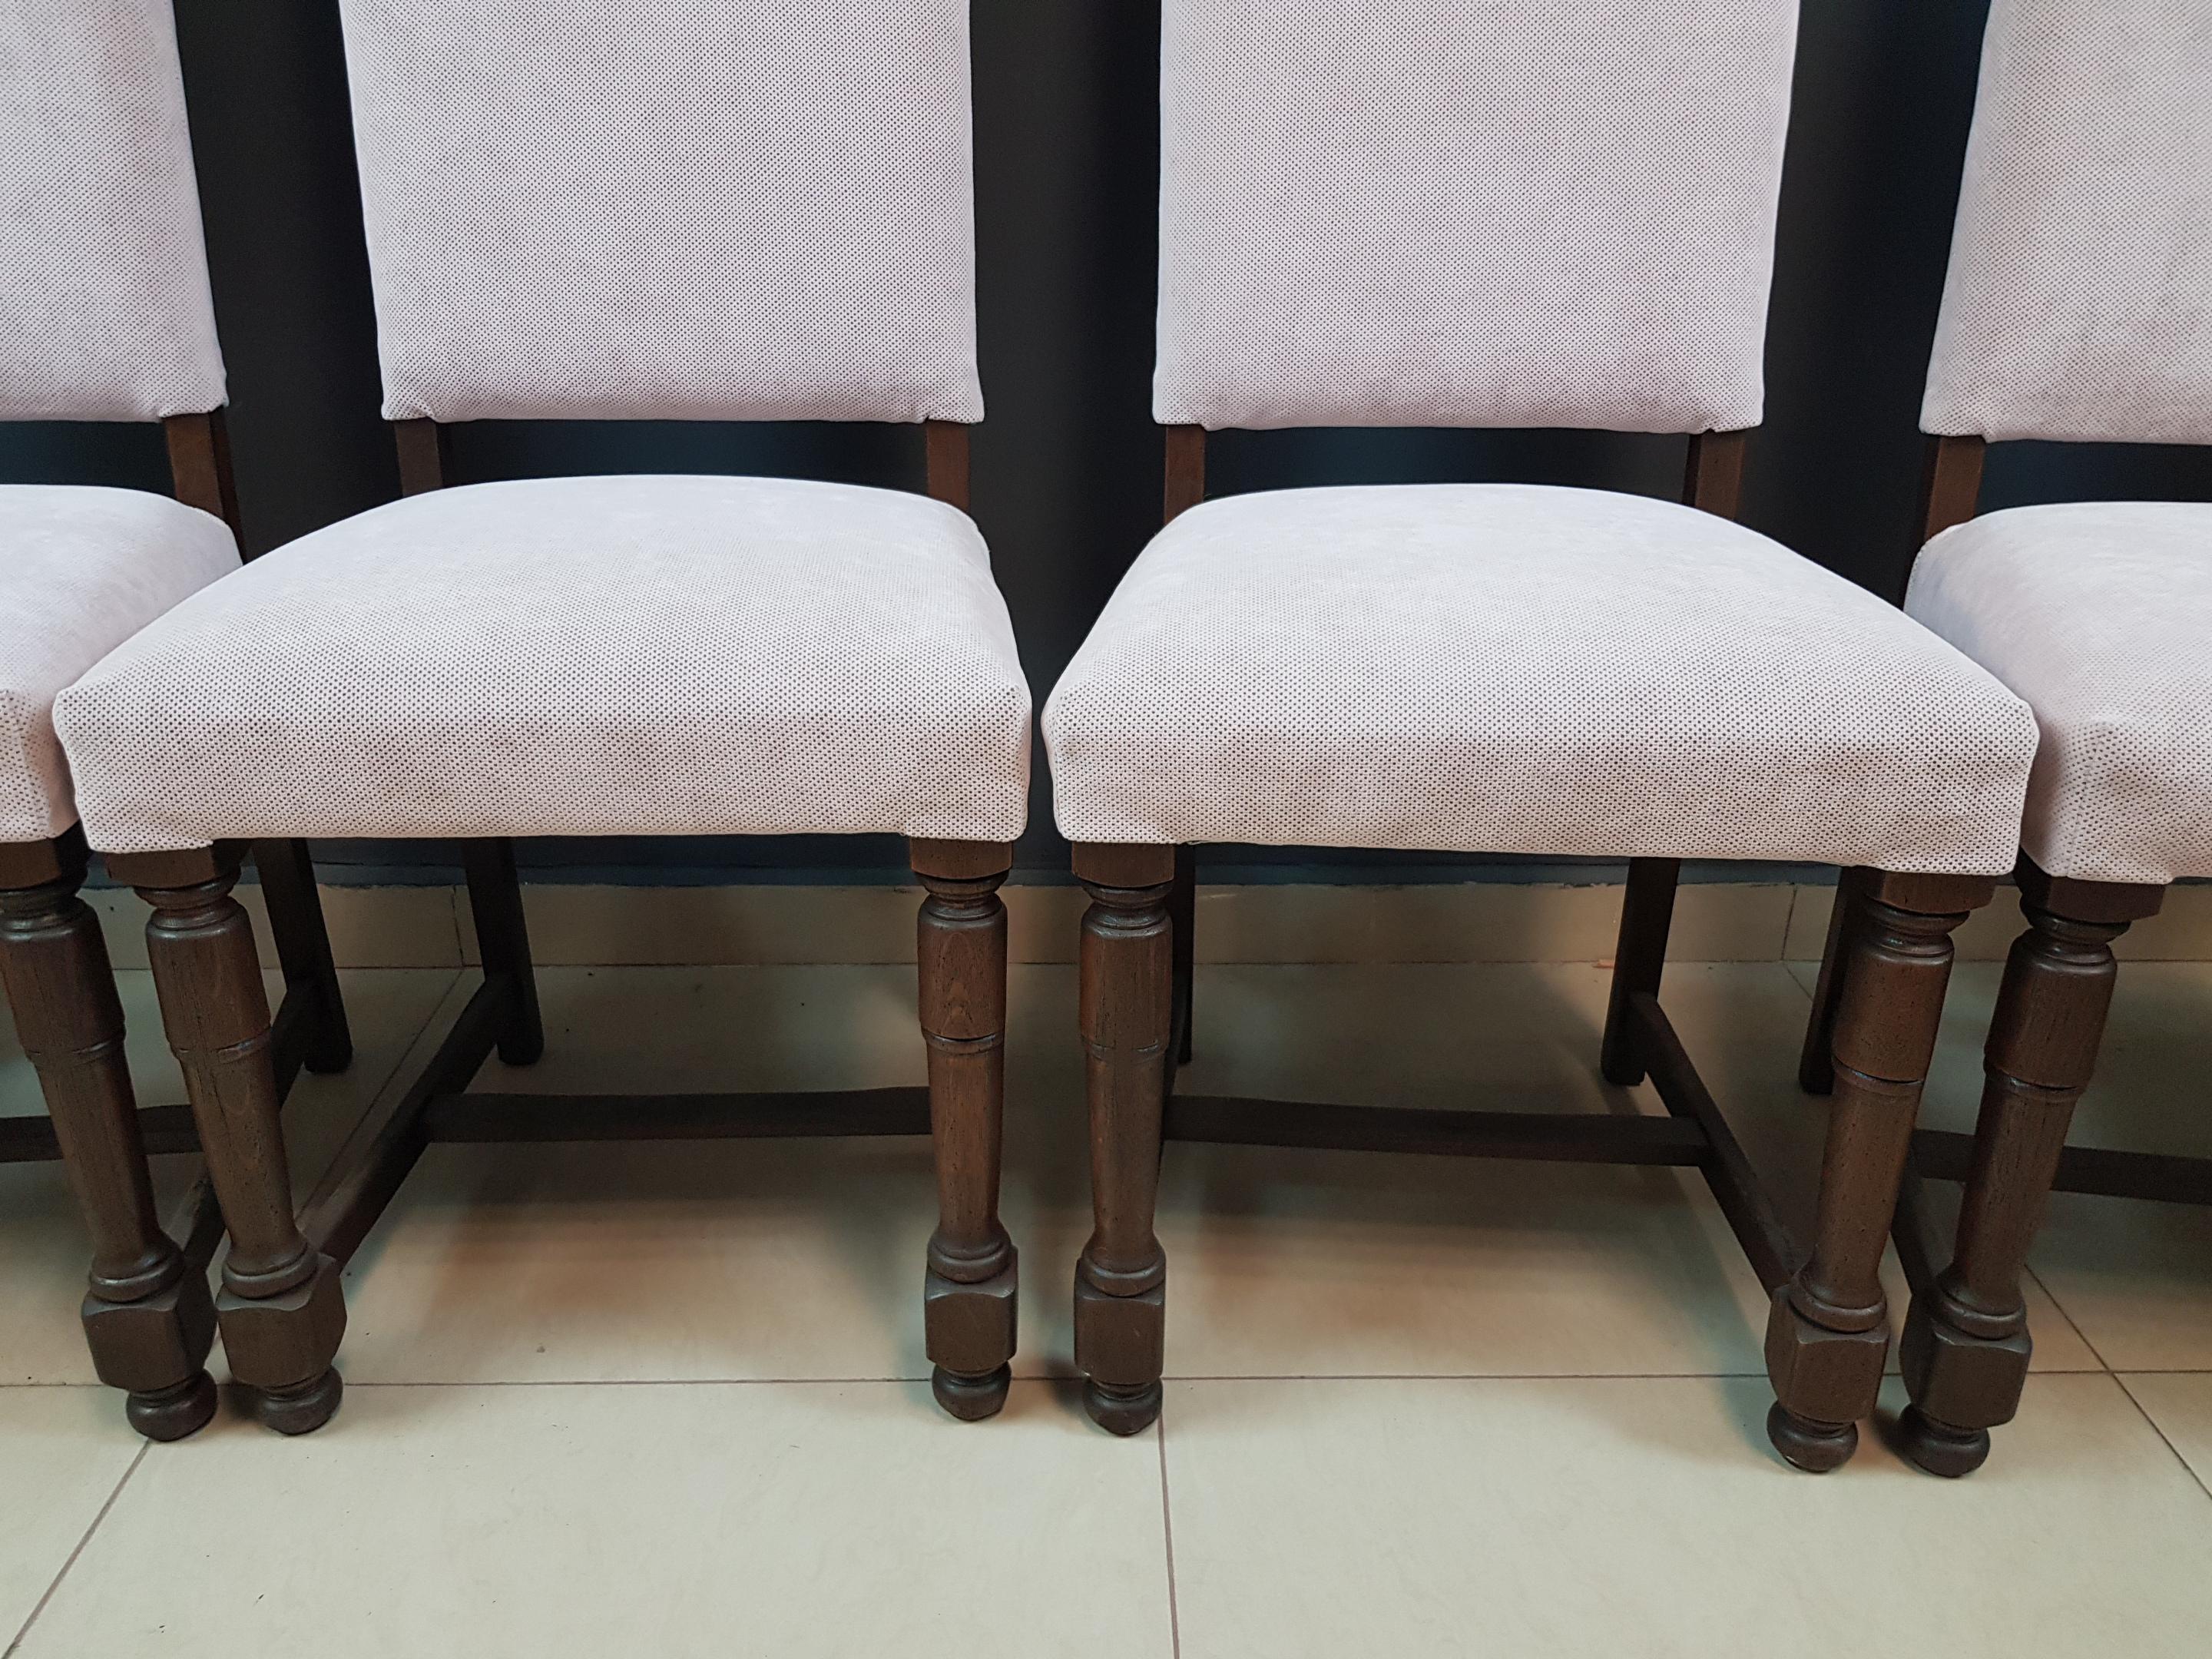 Upholstery French Vintage Square Back Dining Chairs - Set of 6 For Sale